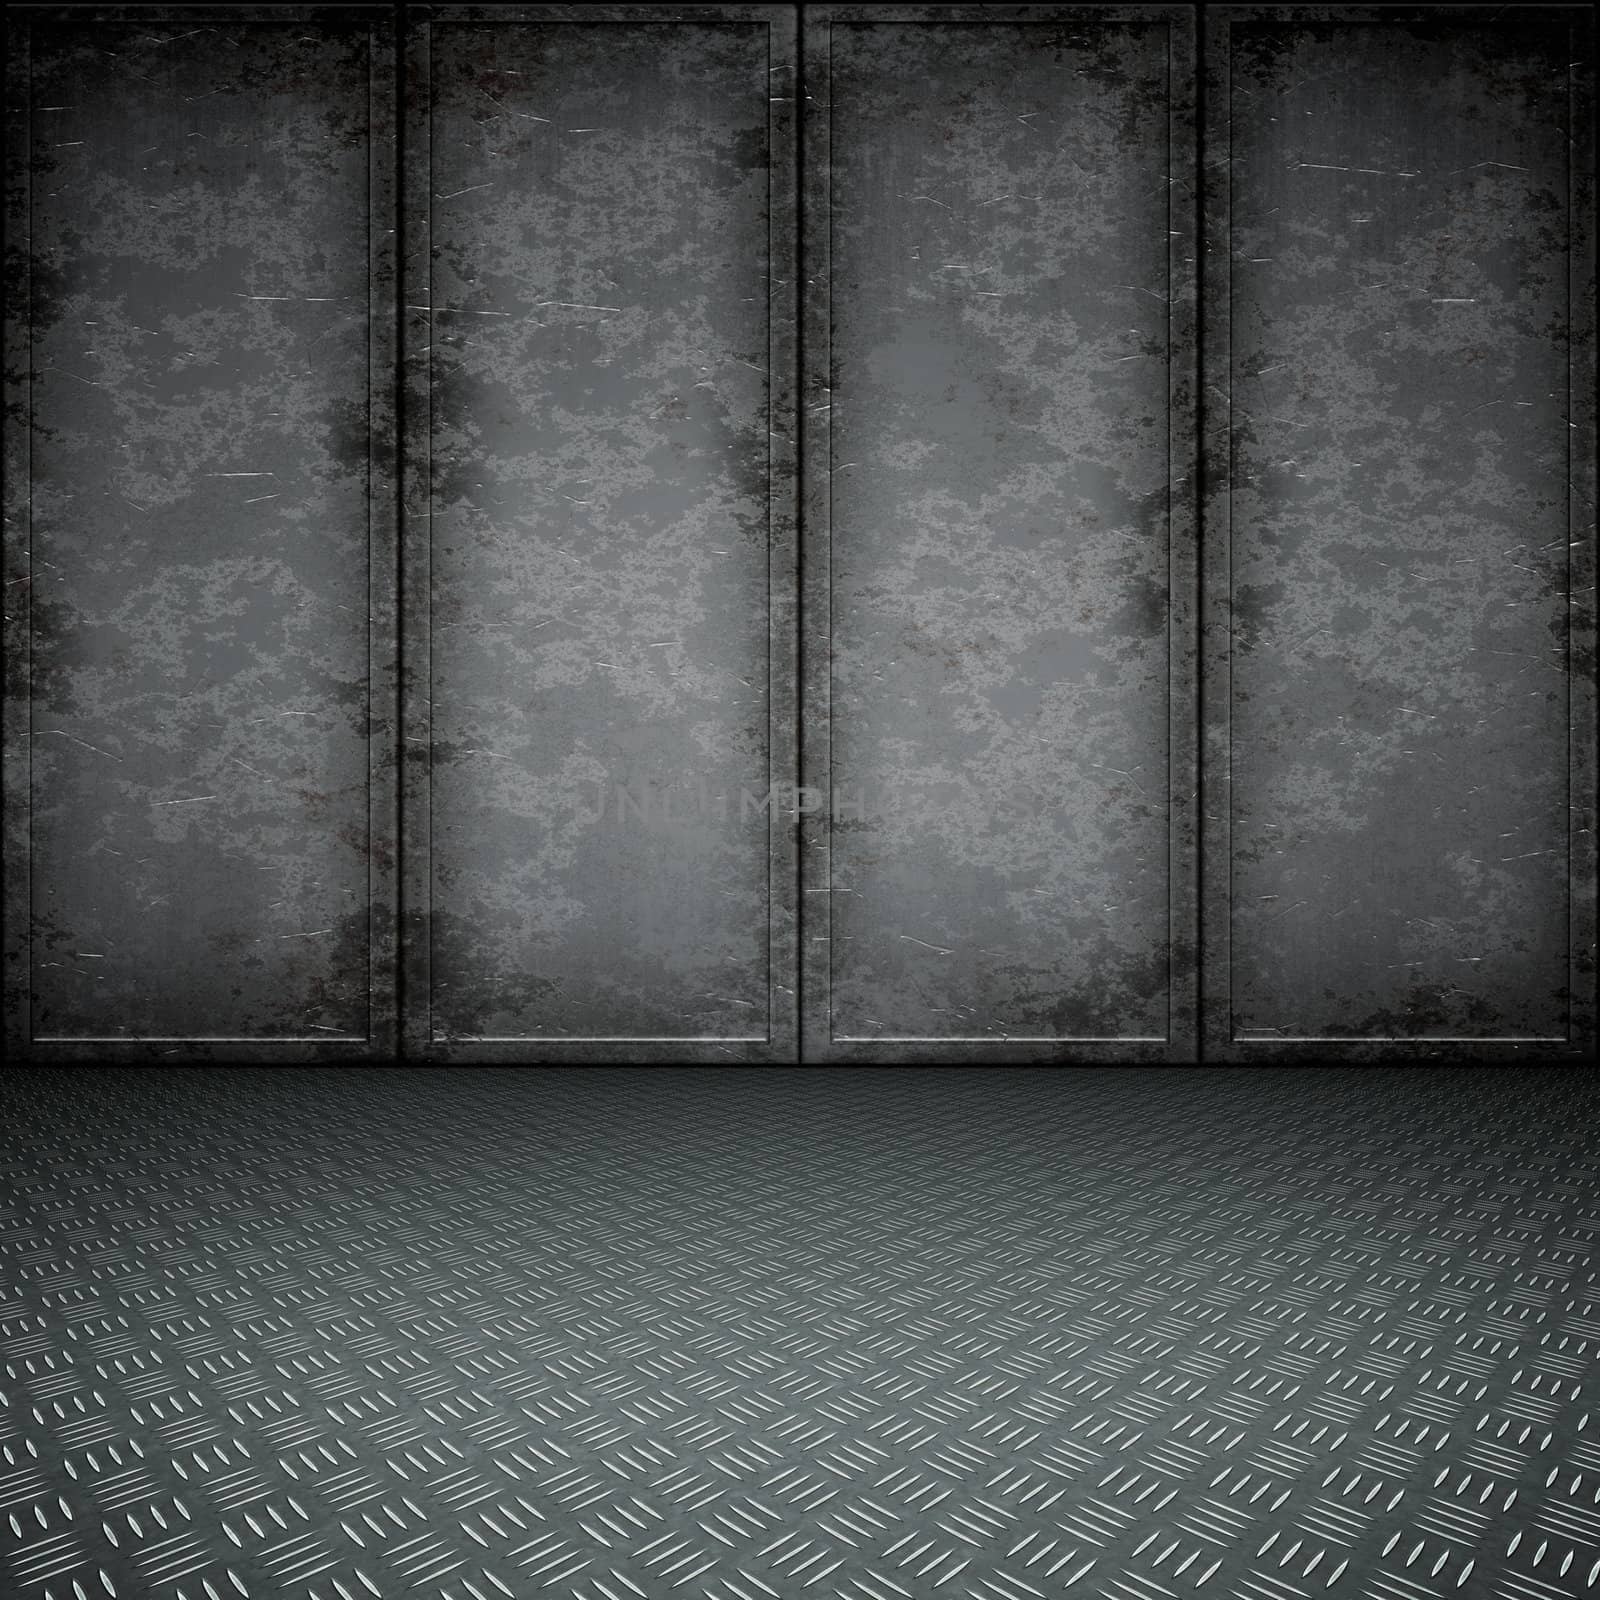 An image of a dark steel floor for your content